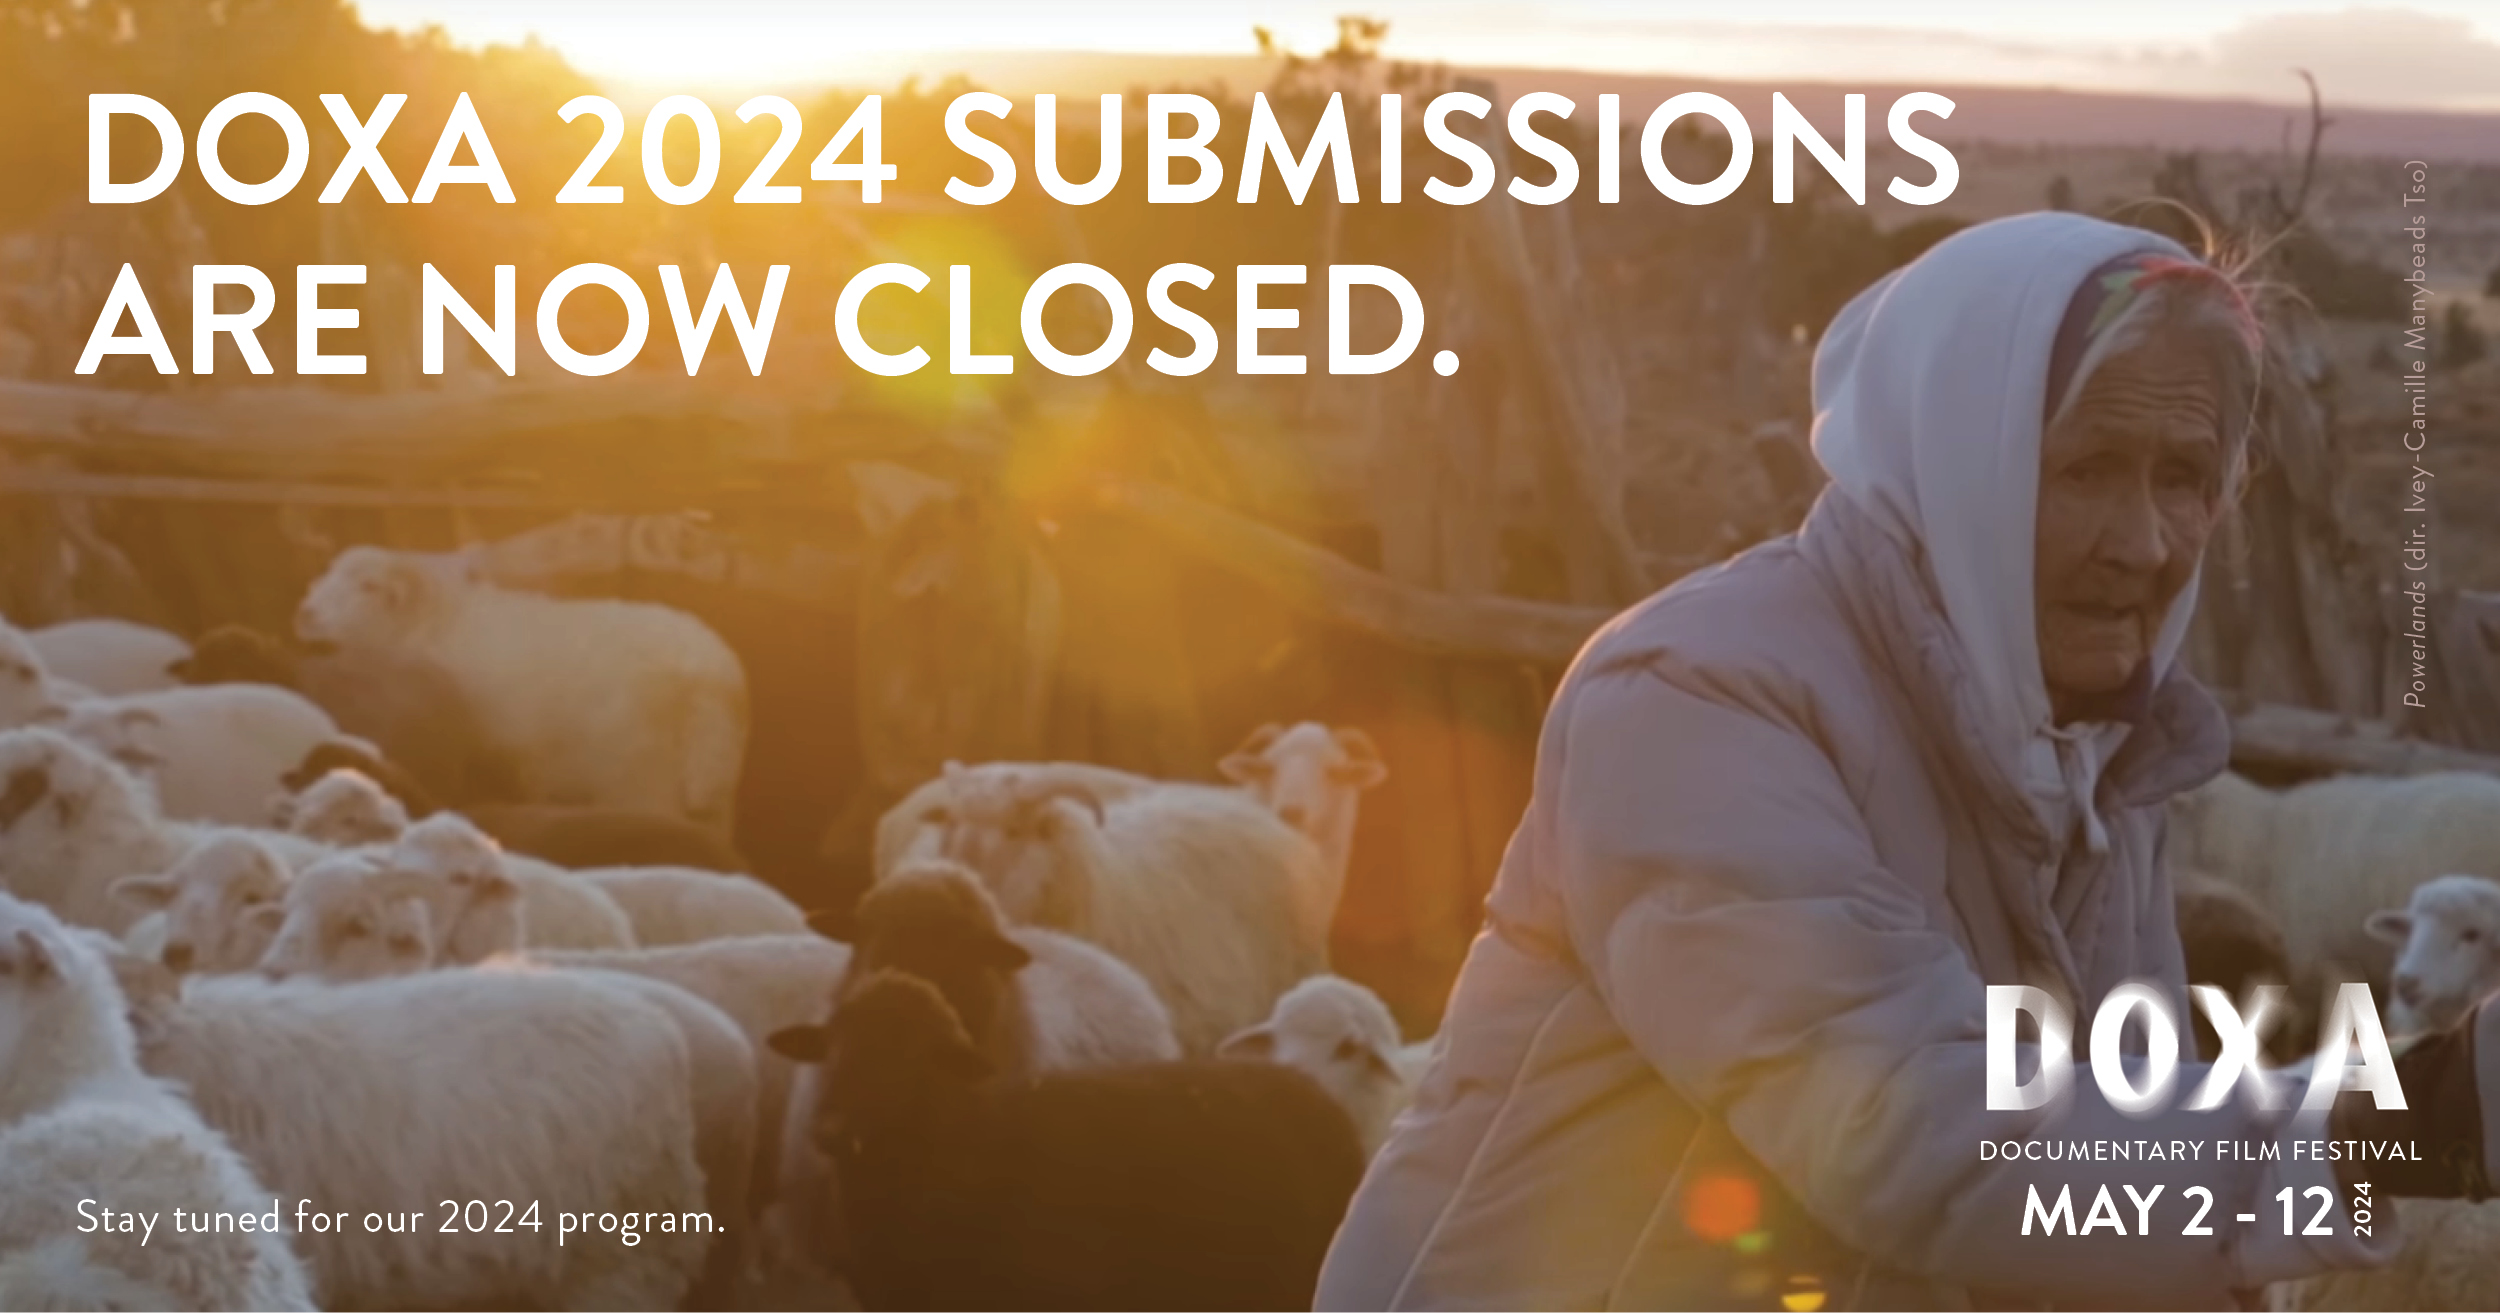 DOXA 2024 Submissions are now closed. Written in white text over an image of an Indigenous shepherd with their flock of sheet at sundown.